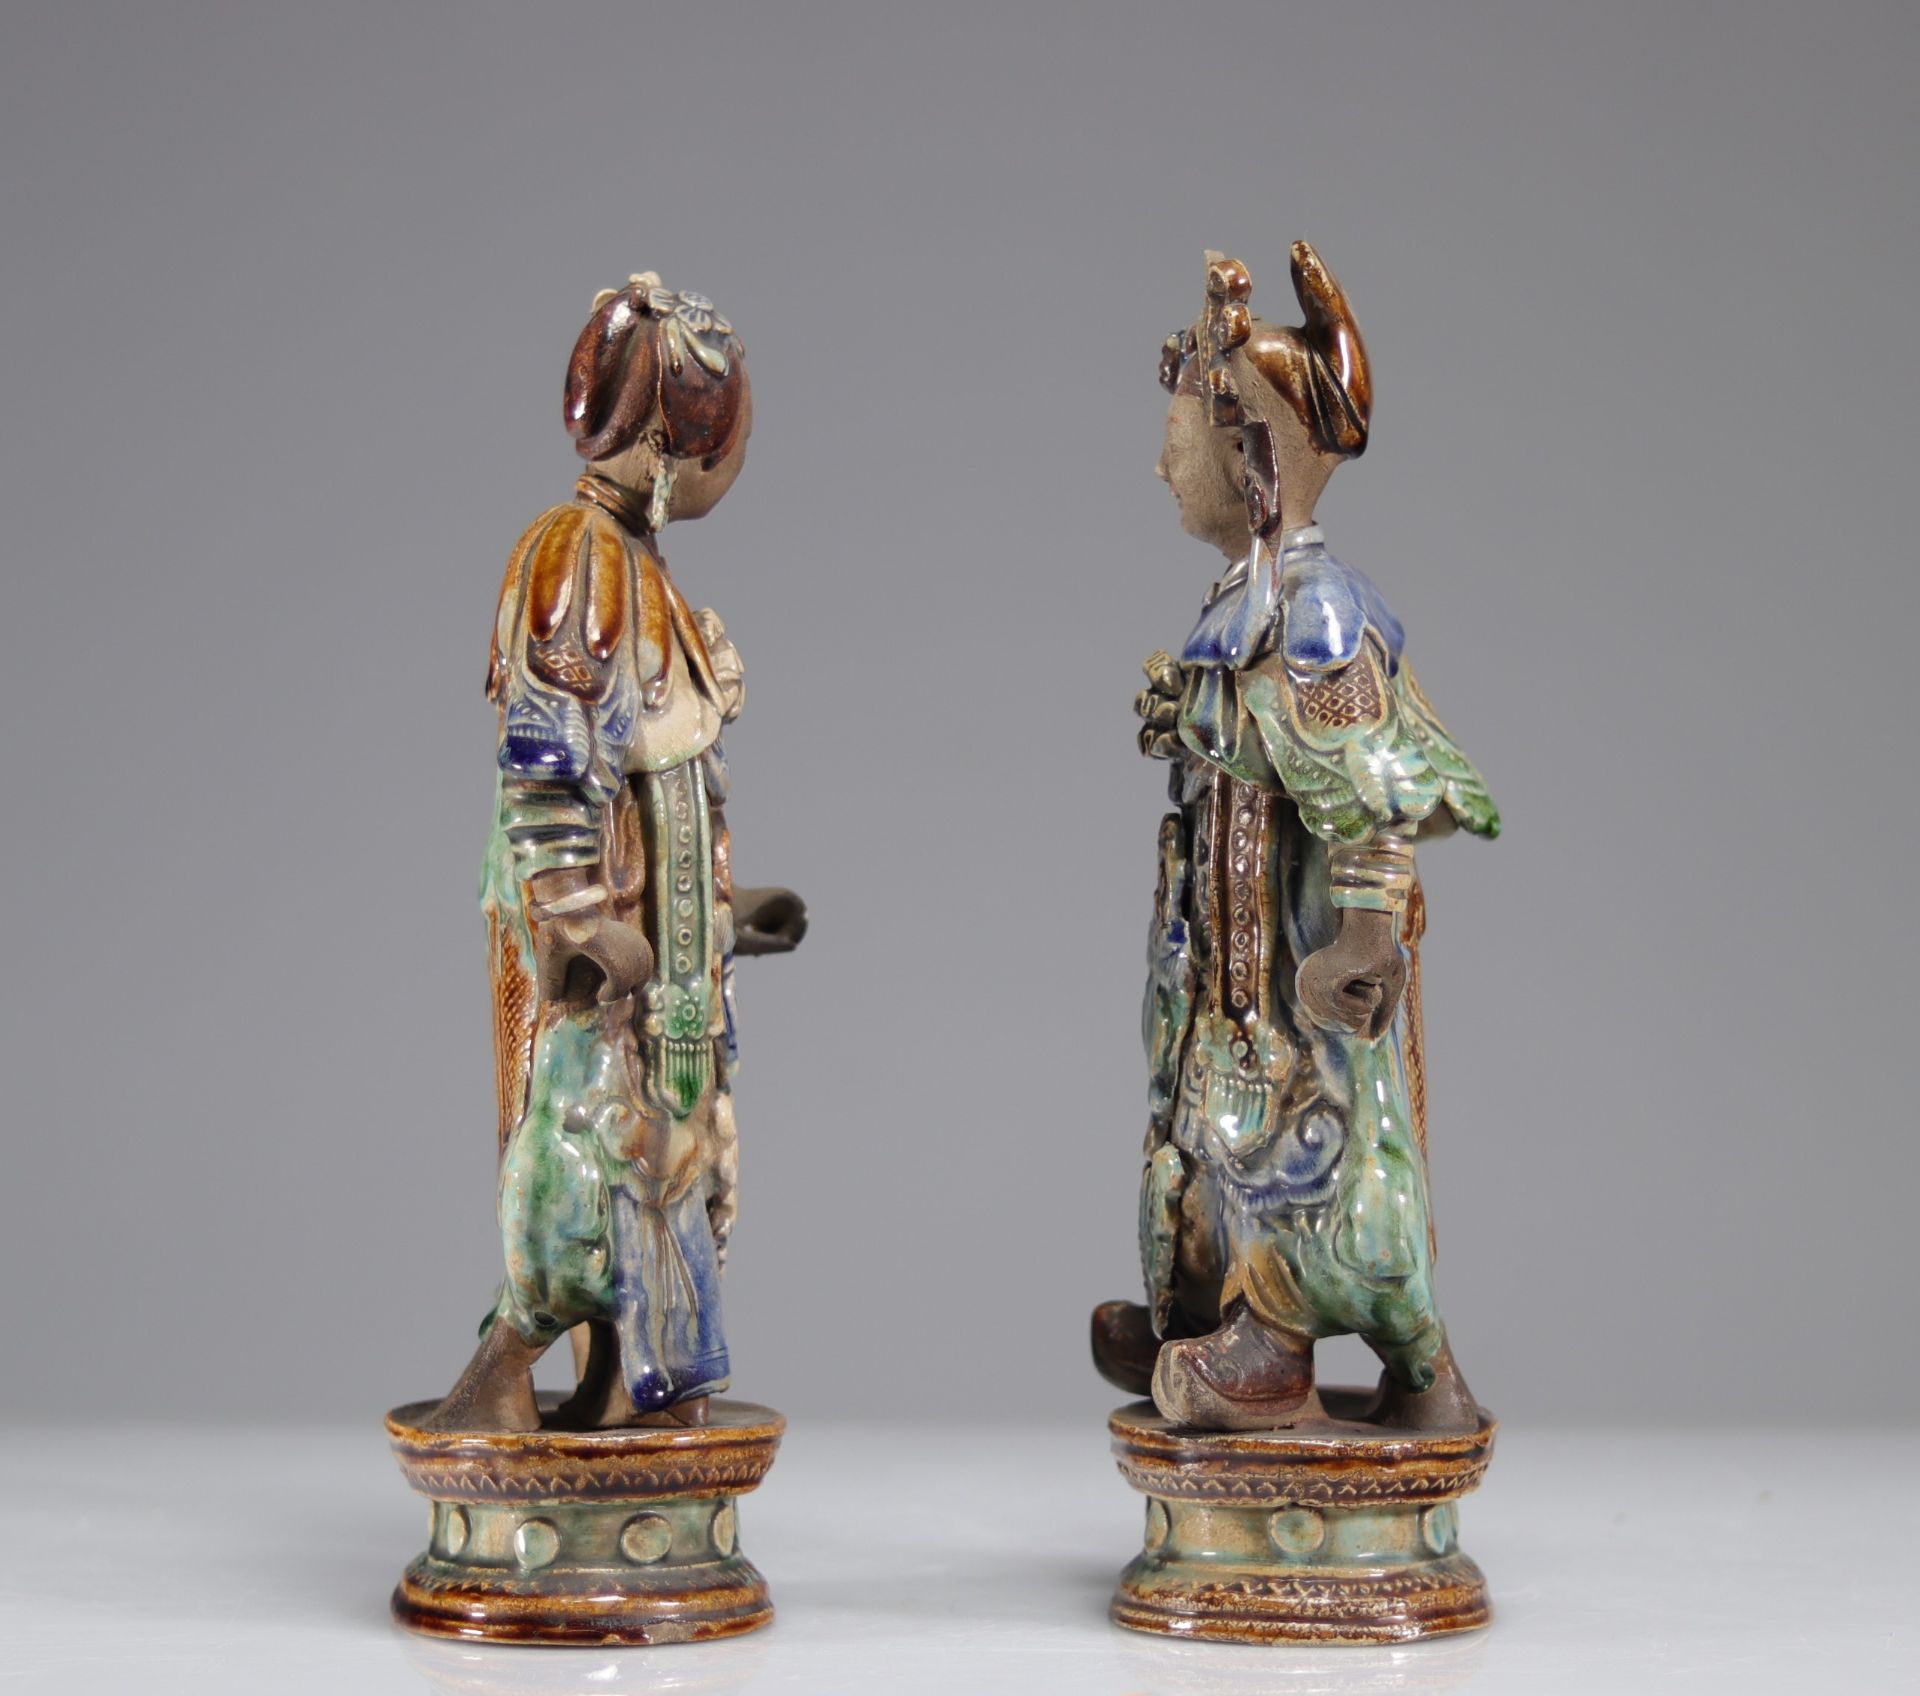 China pair of Qing period glazed sandstone statues - Image 2 of 3